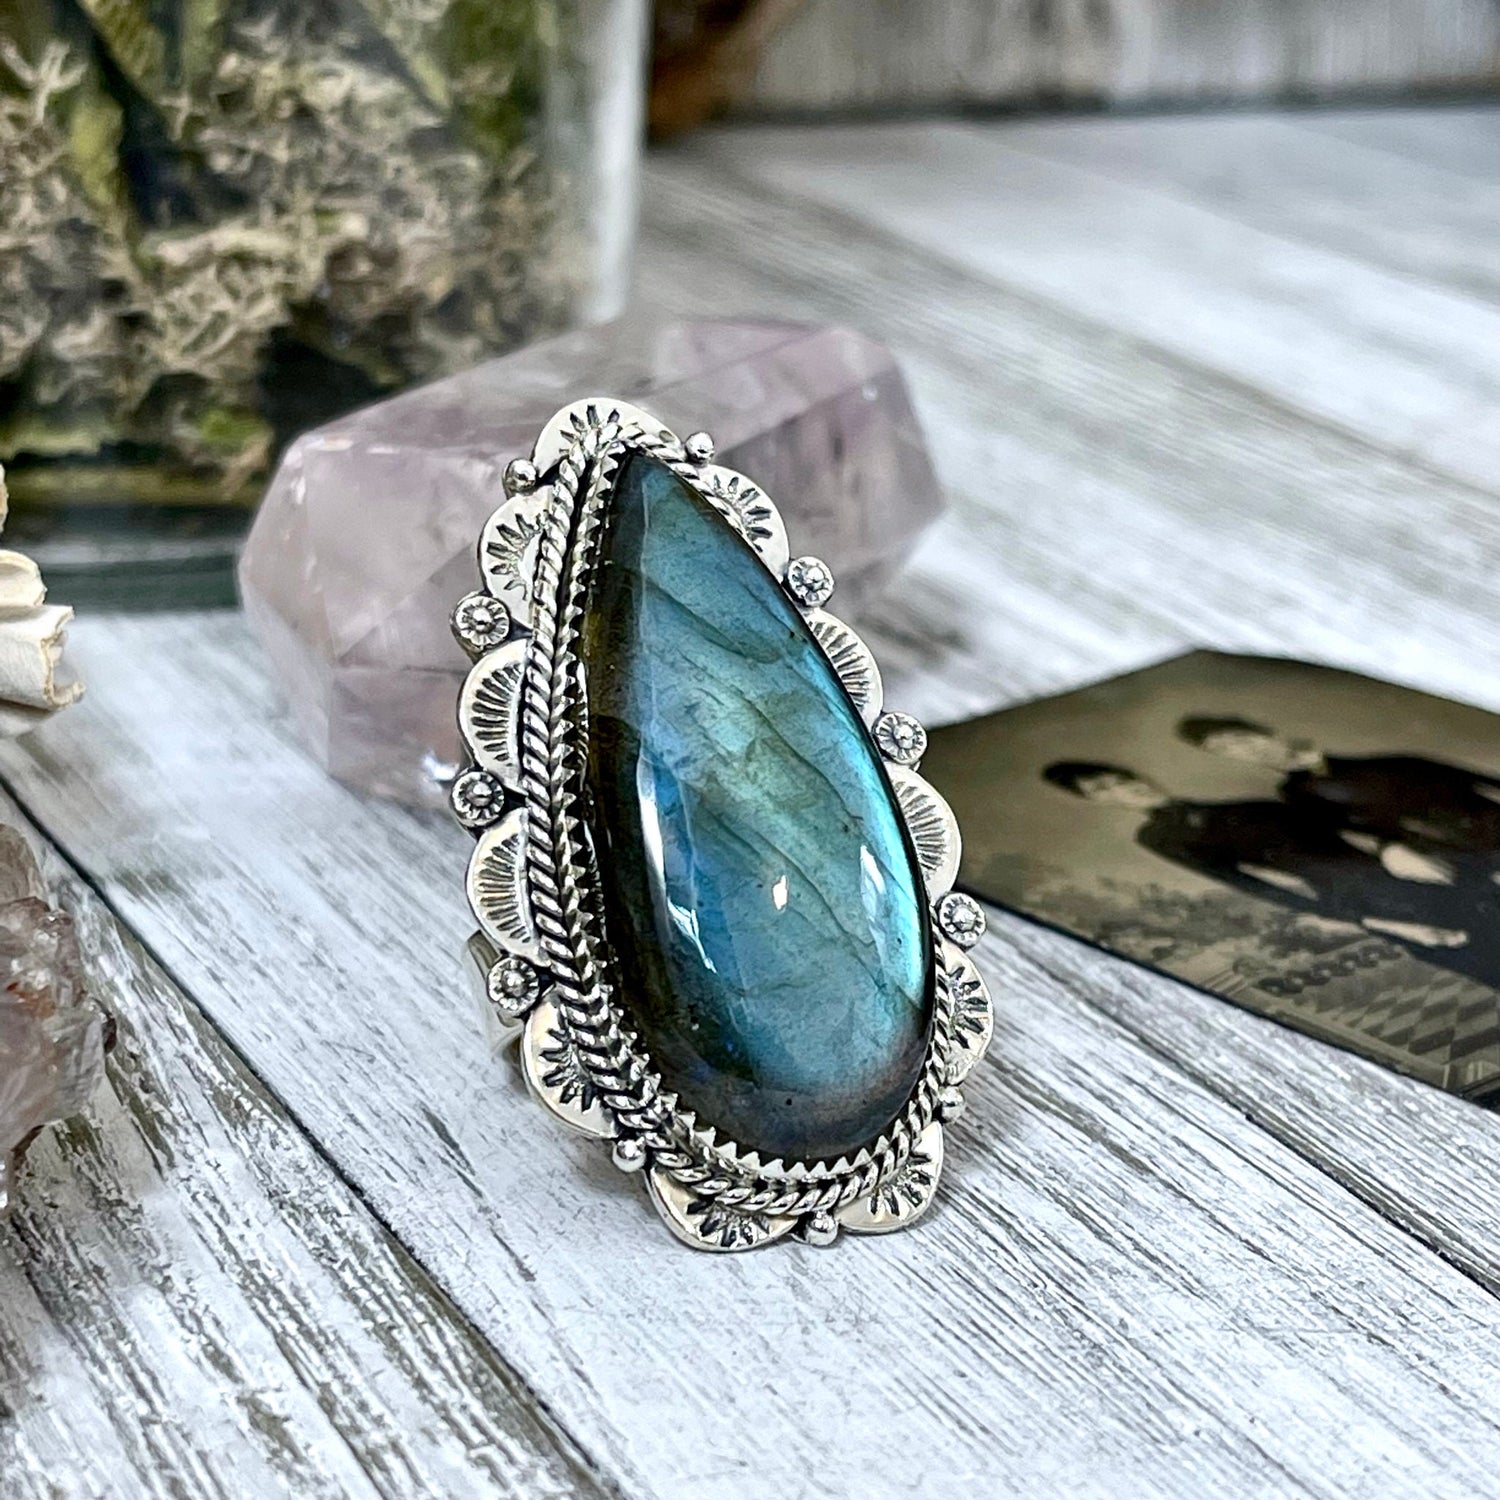 Labradorite Teardrop Crystal Statement Ring in Sterling Silver- Adjustable- Designed by FOXLARK Collection Adjusts to Size 6,7,8,9, or 10